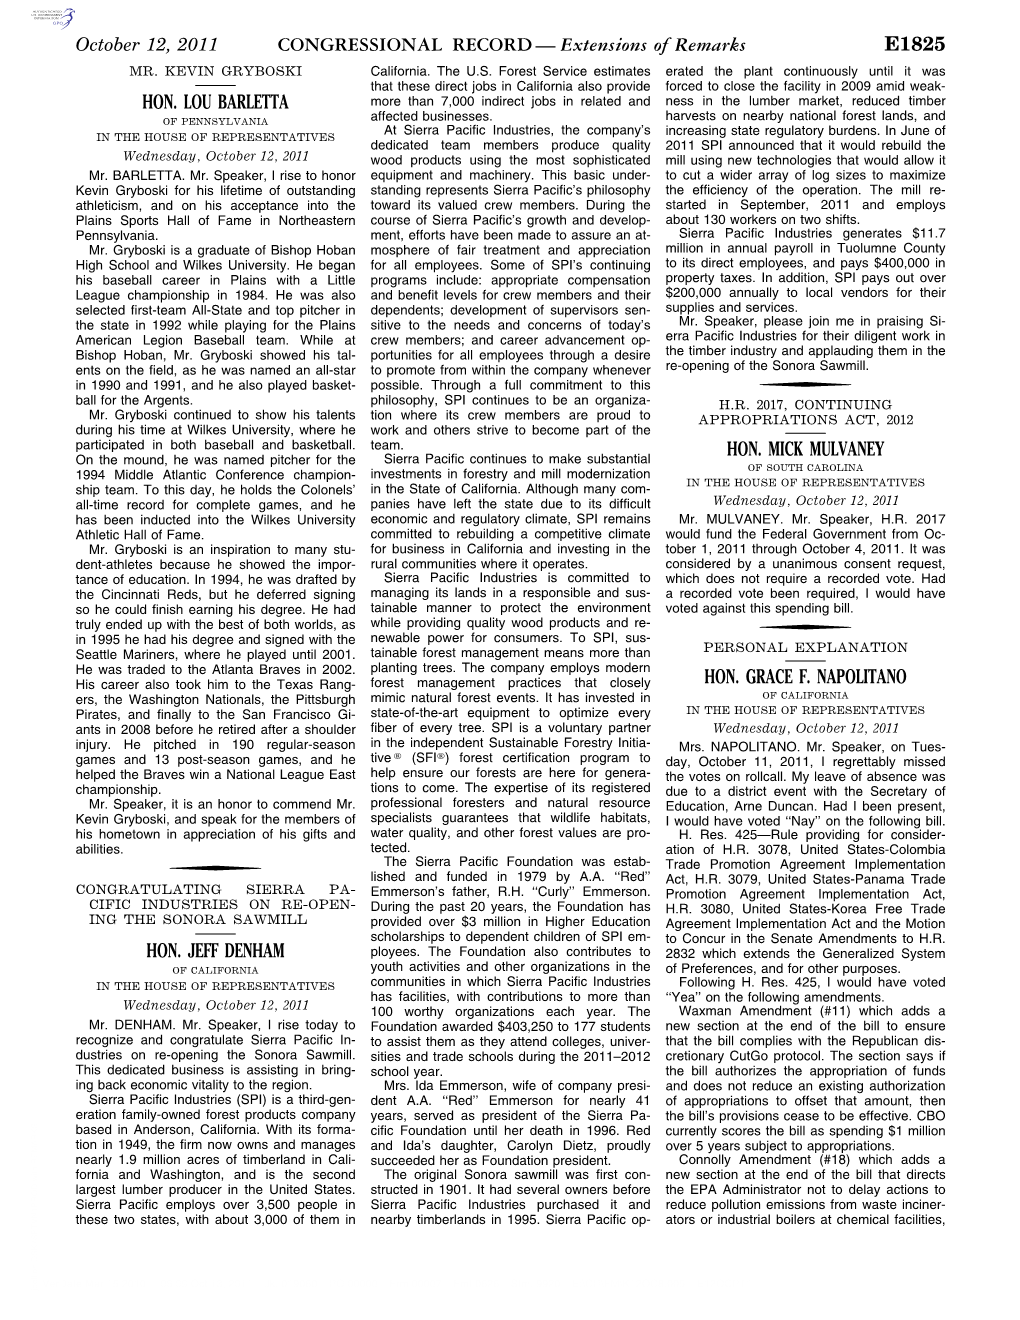 CONGRESSIONAL RECORD— Extensions of Remarks E1825 HON